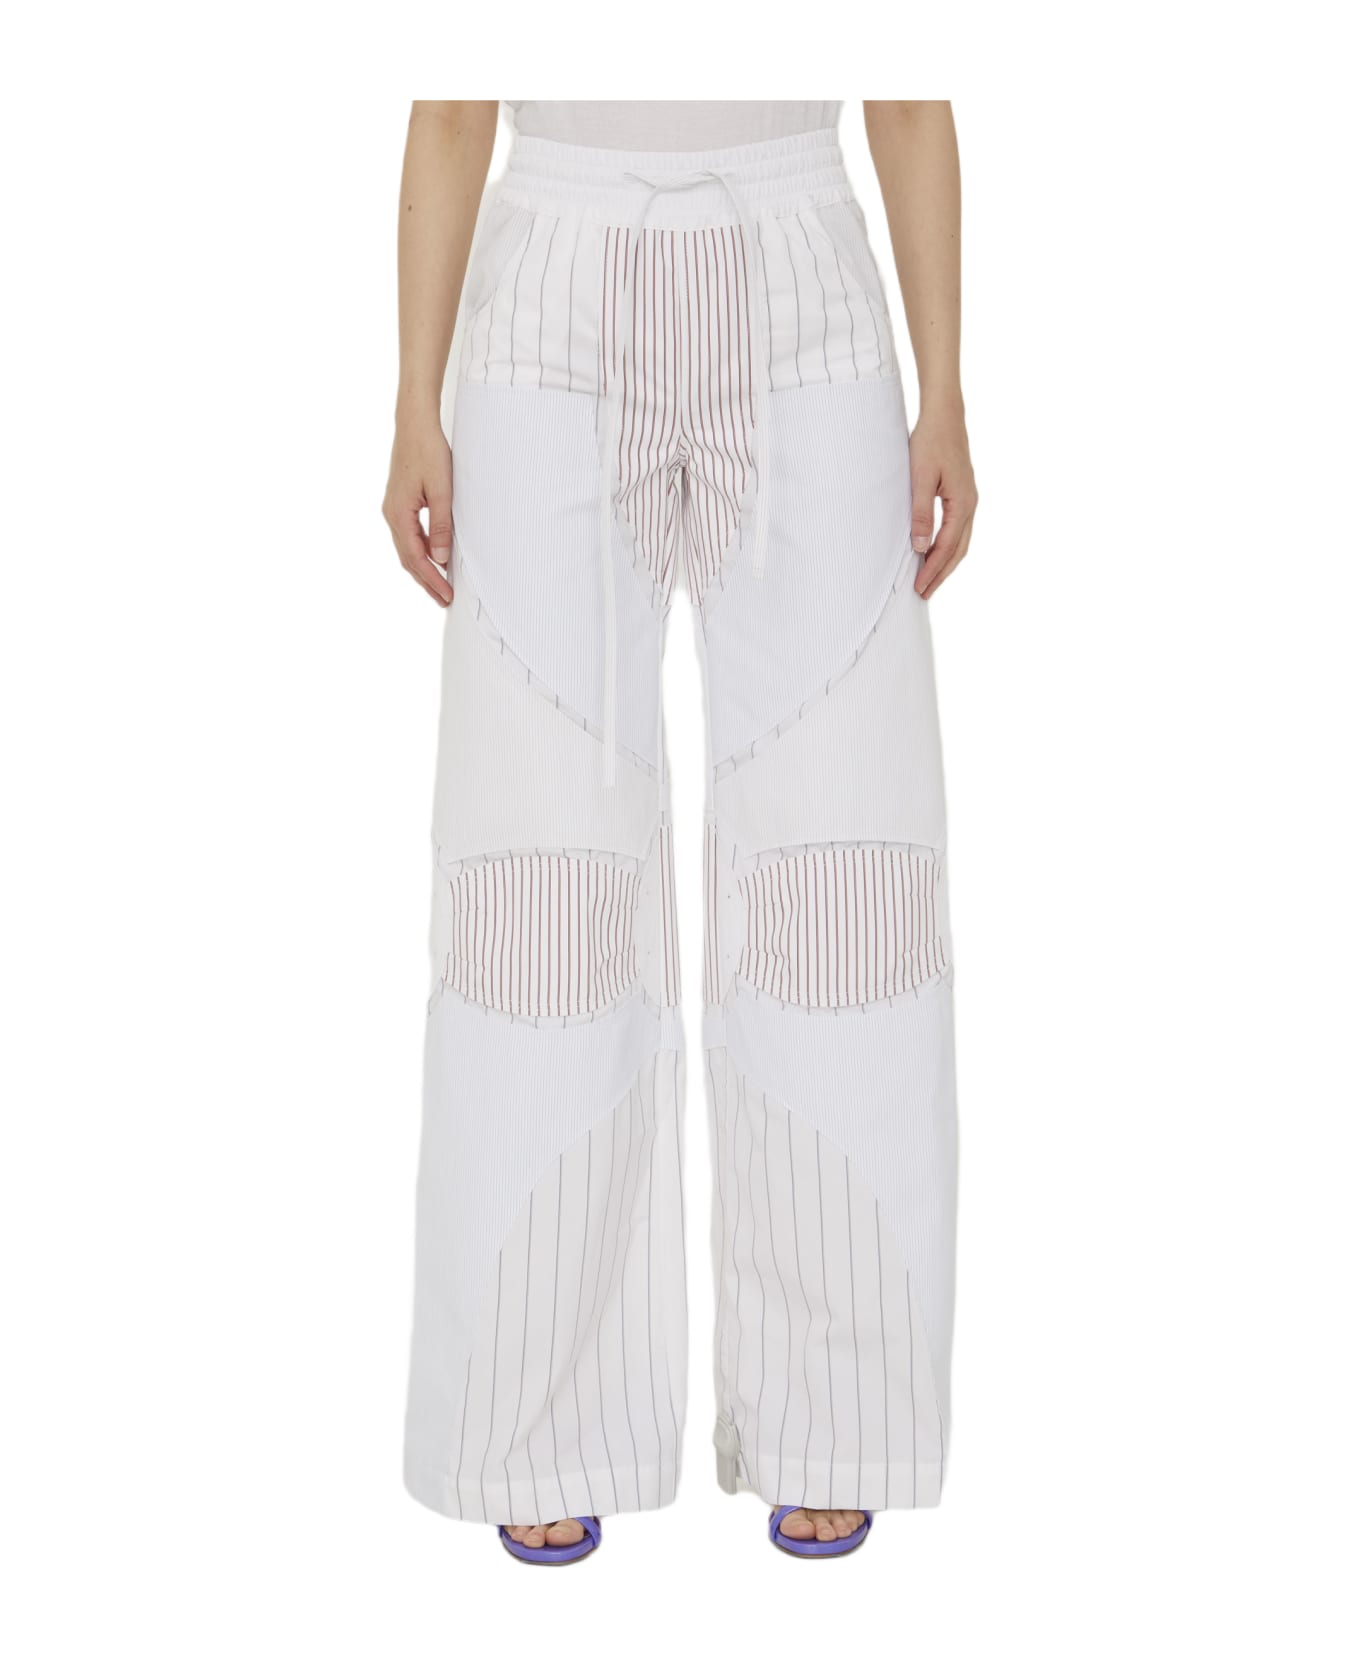 Off-White Motorcycle Pants - WHITE ボトムス